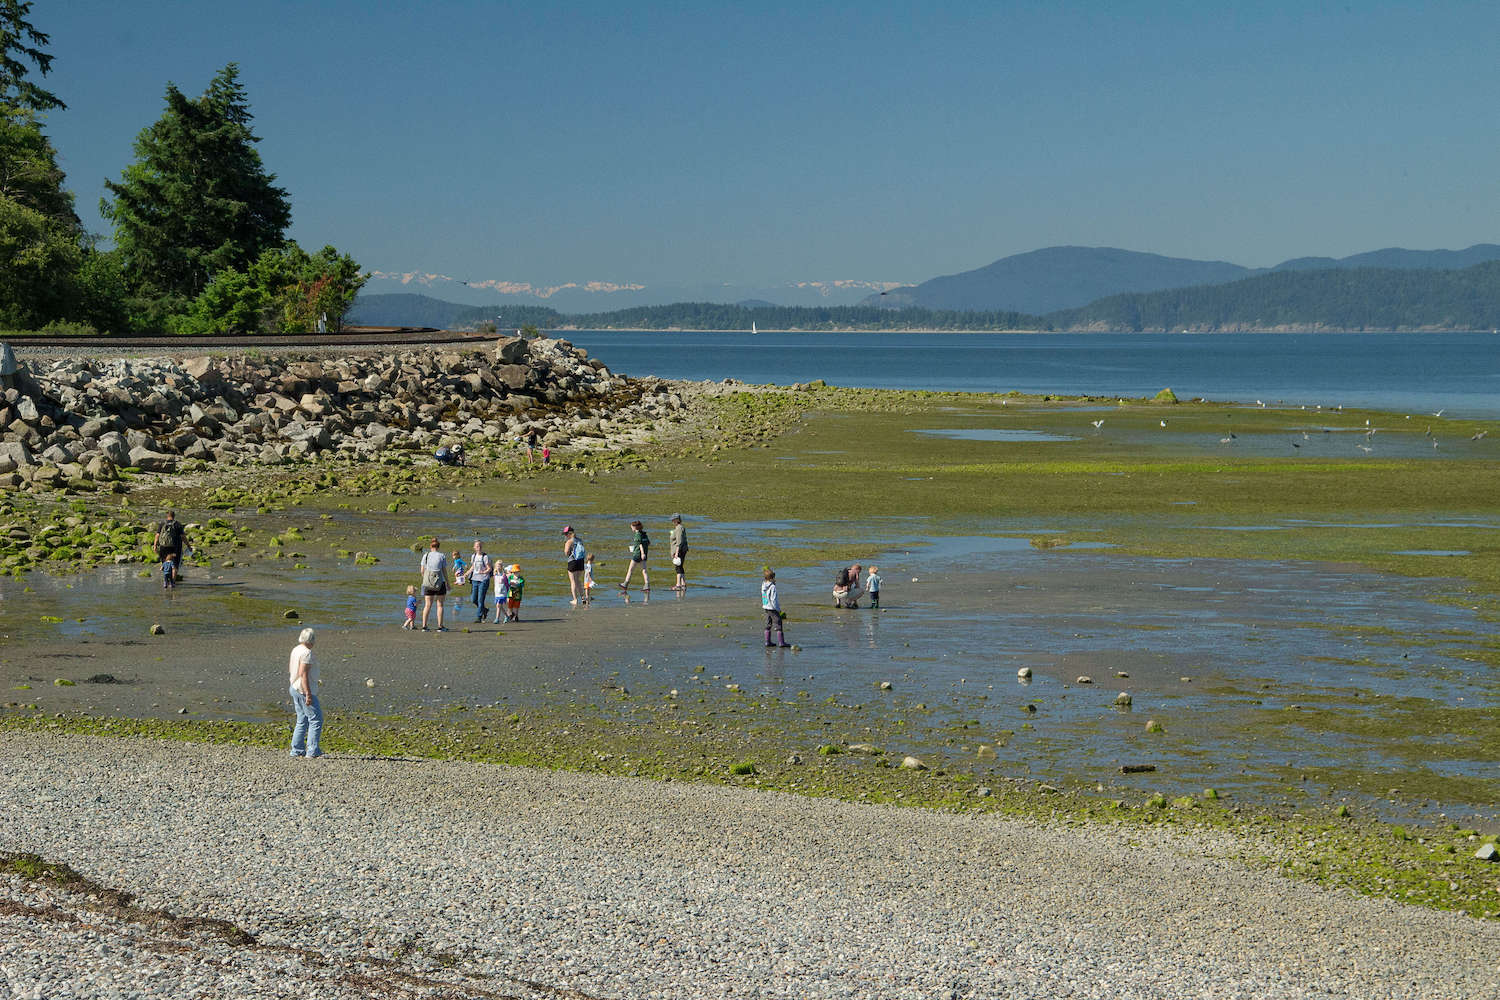 Marine Park beach at low tide, rocks and green algae exposed. A group of people are exploring the beach.